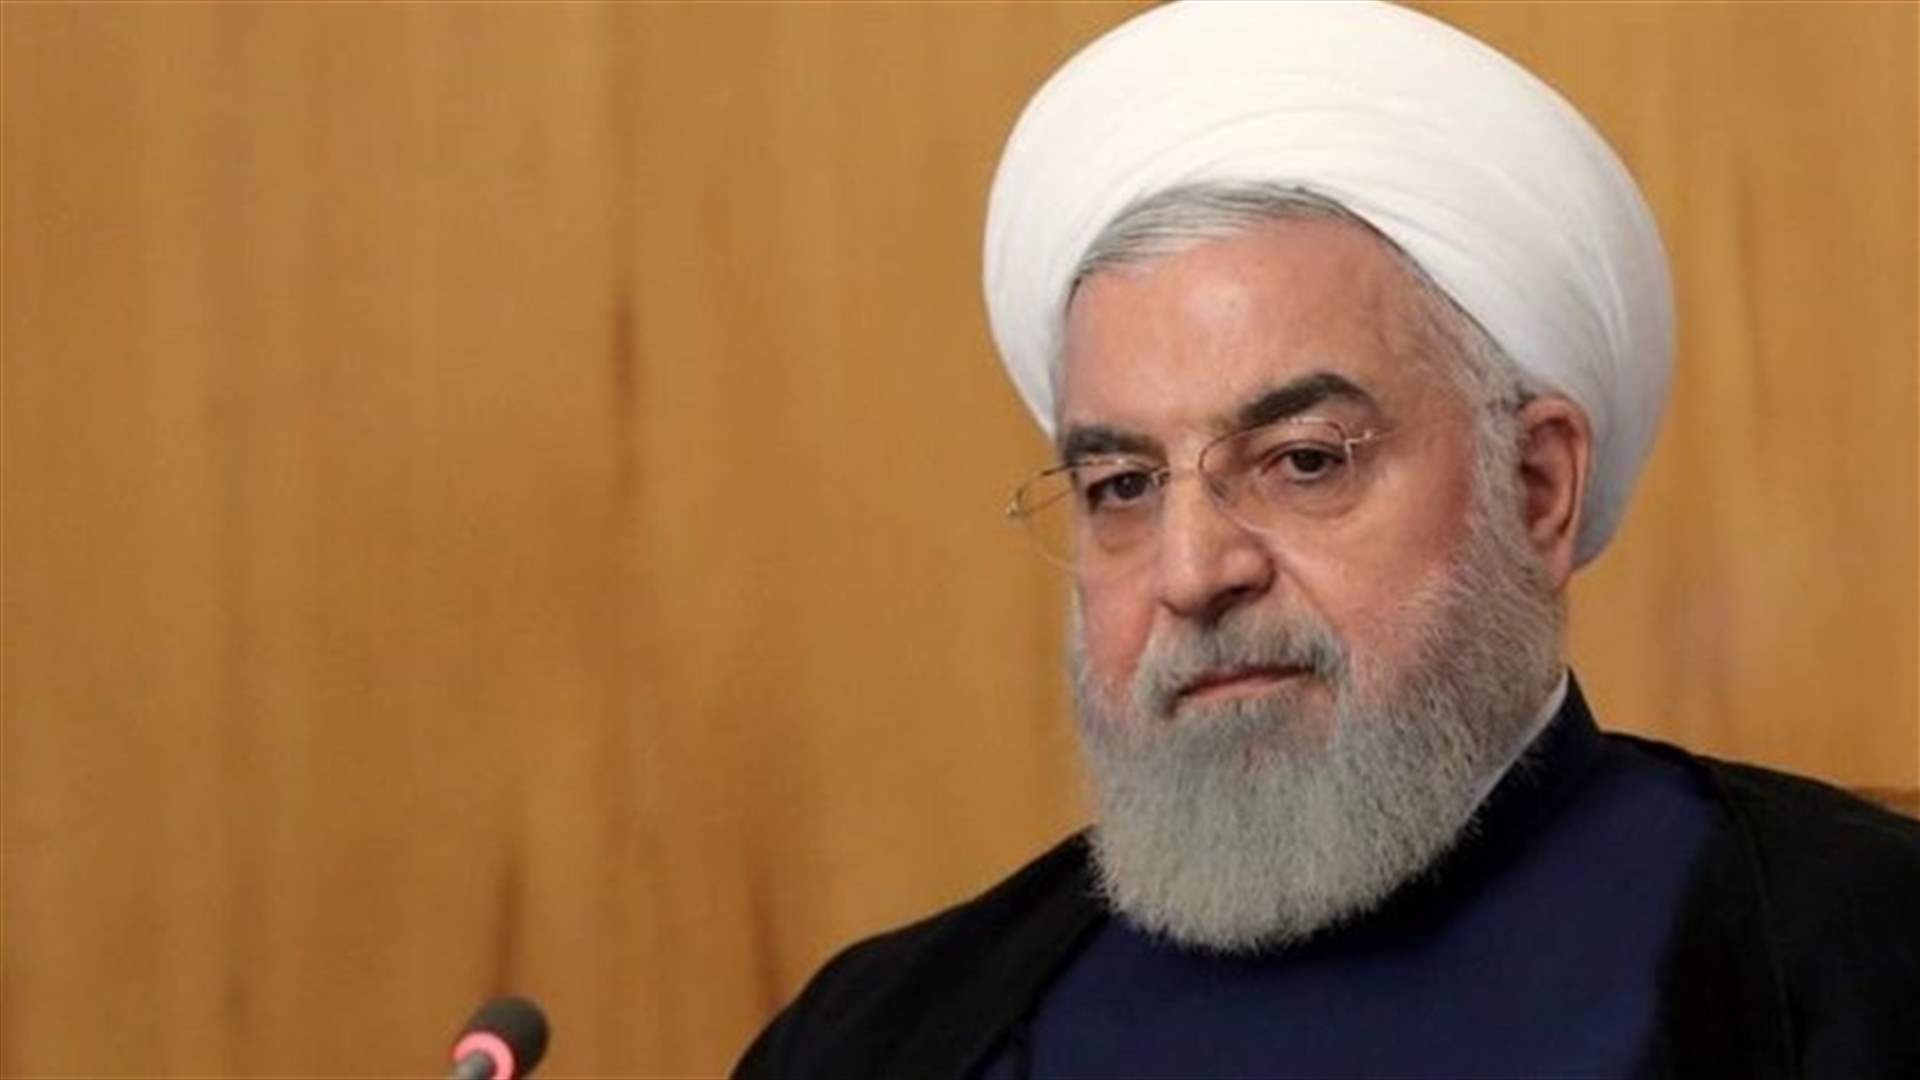 Iran will bypass US sanctions or overcome them through talks -Rouhani